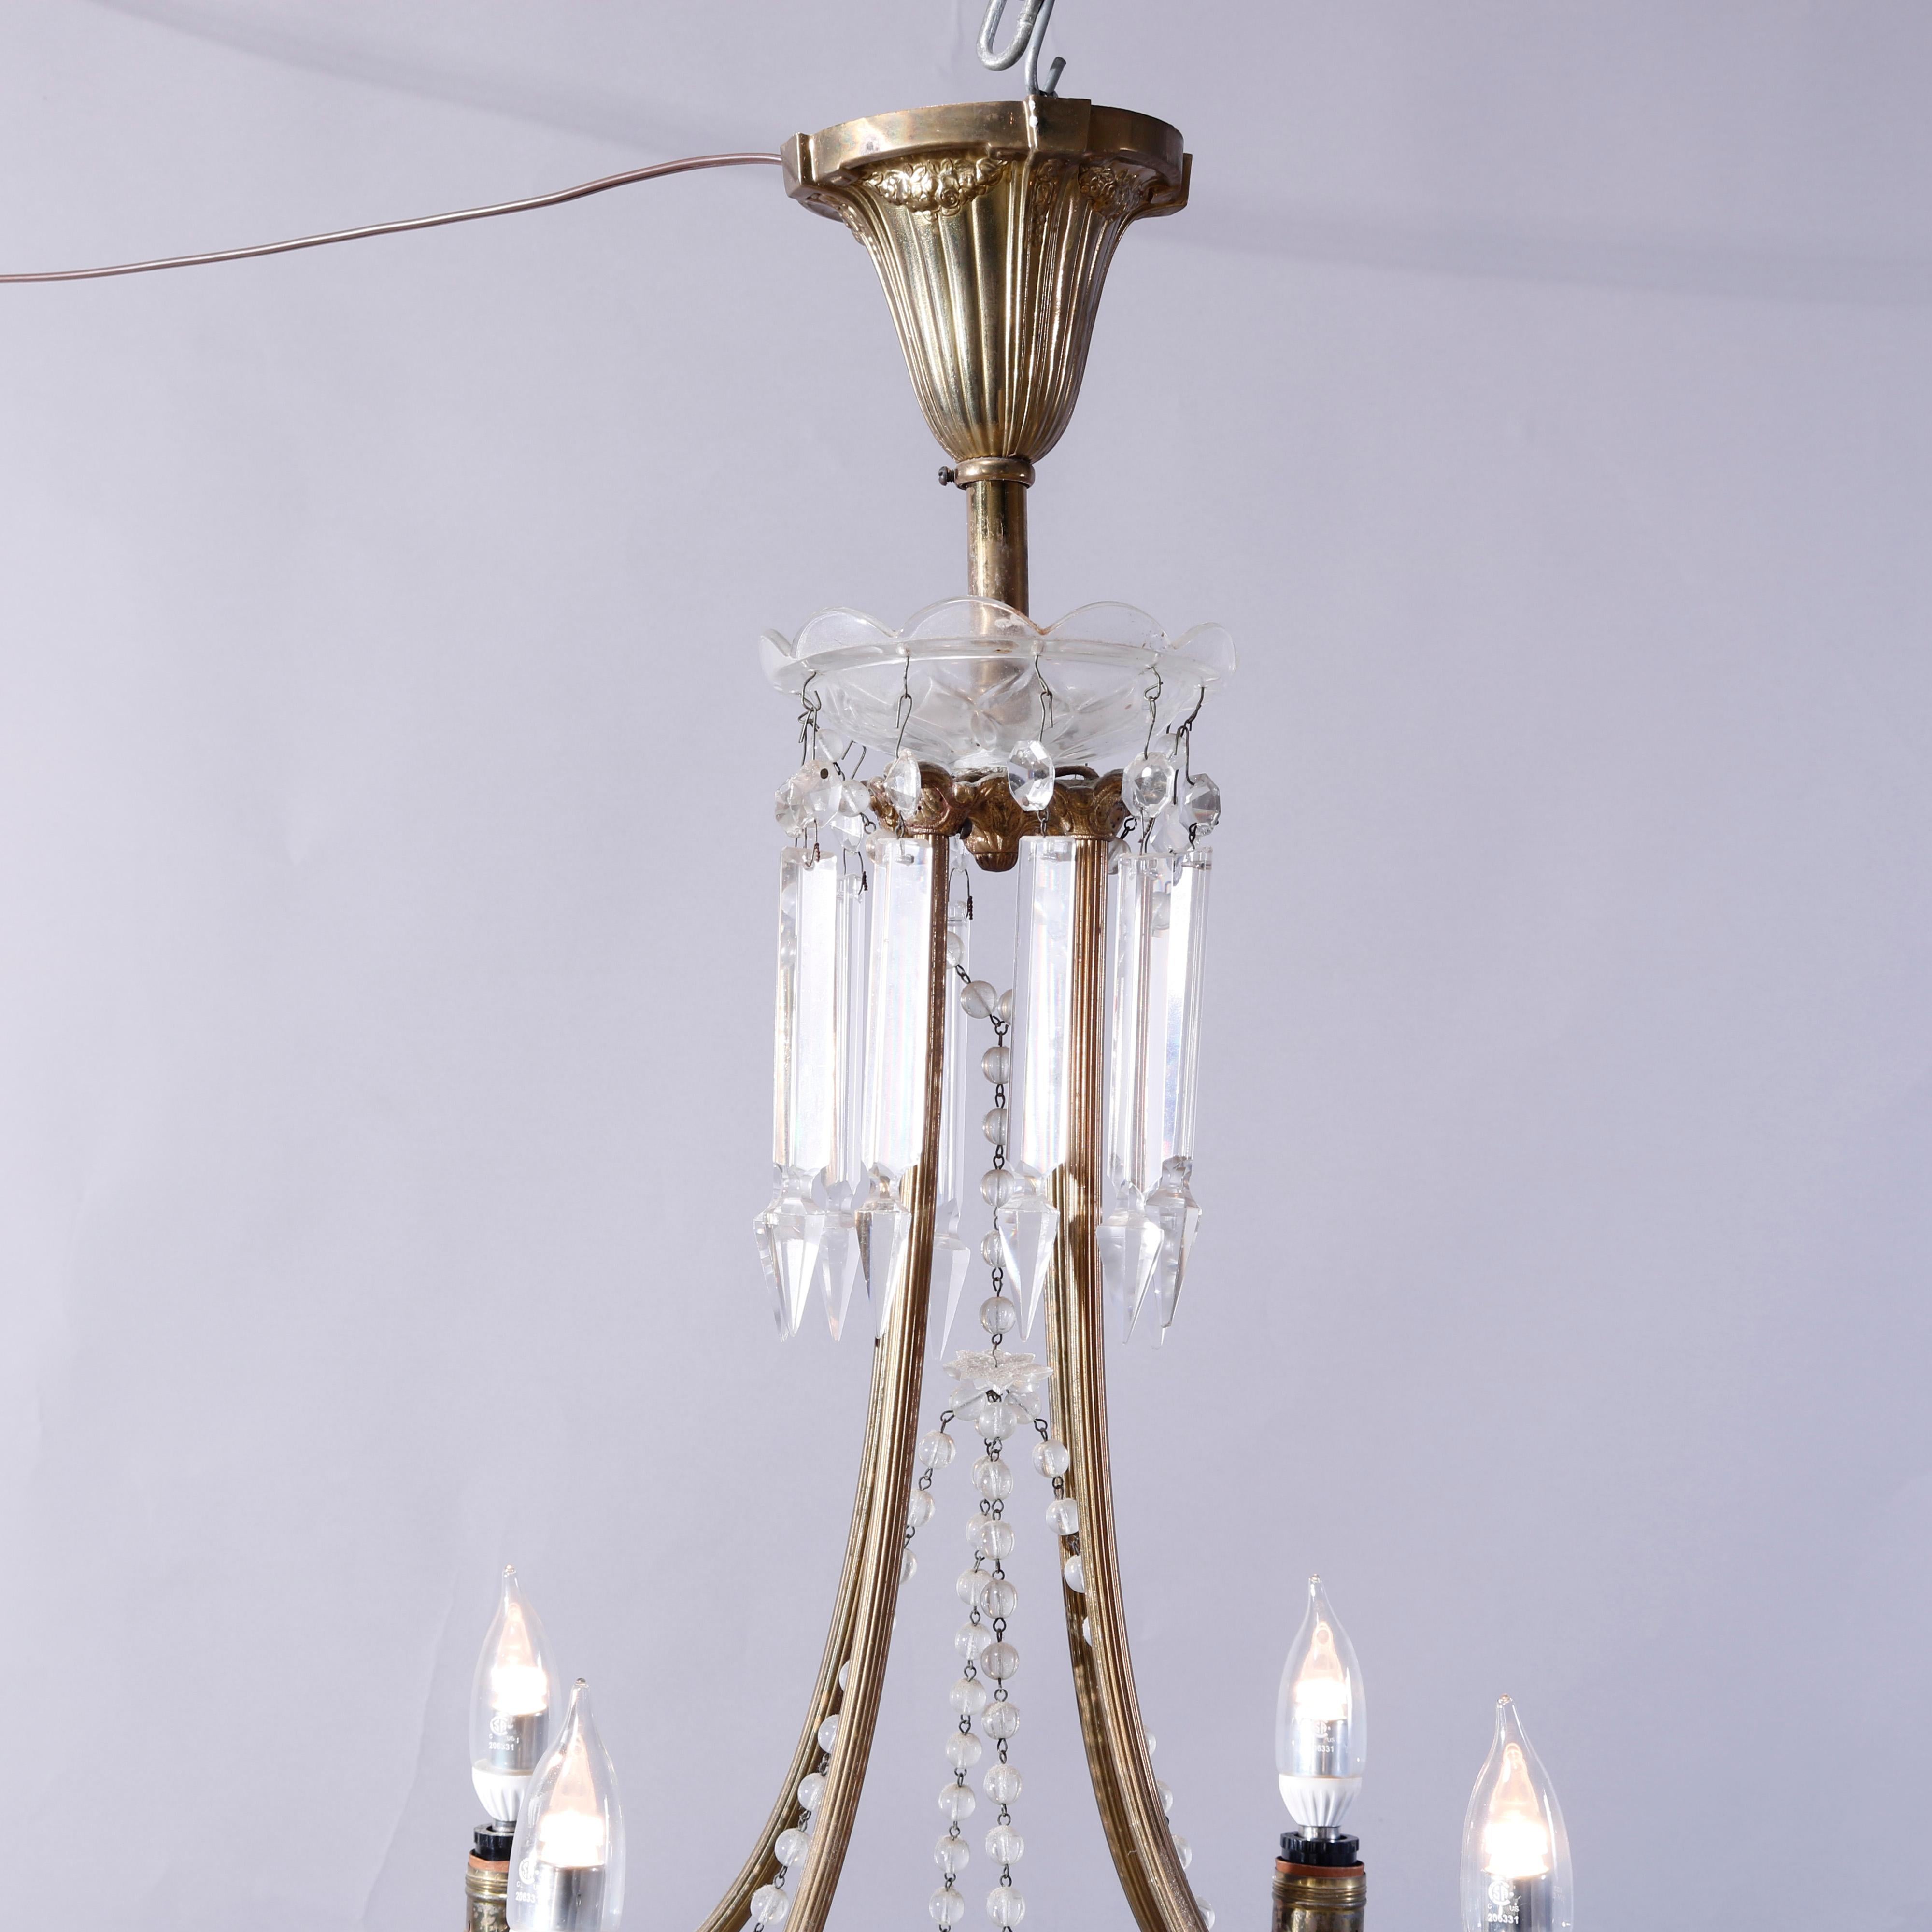 20th Century Antique French Style Bronzed Four-Light Chandelier with Draped Crystals, c1920 For Sale